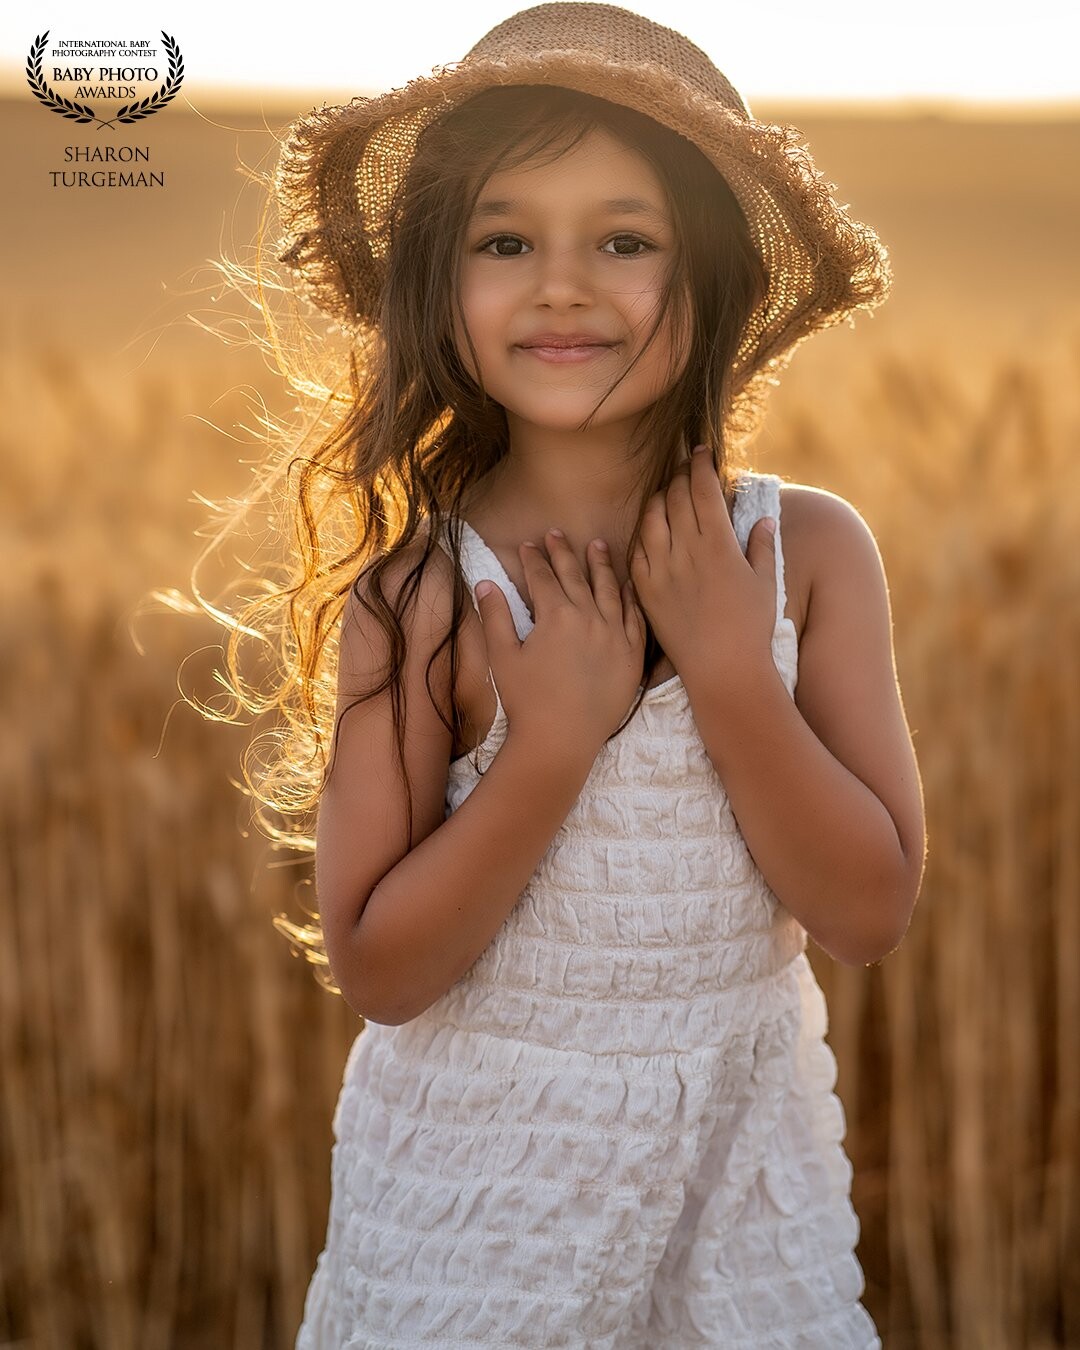 Lior, my eldest daughter<br />
How beautiful and shining she is in the endless expanses of the wheat fields.<br />
The light in my life, the essence of my existence.